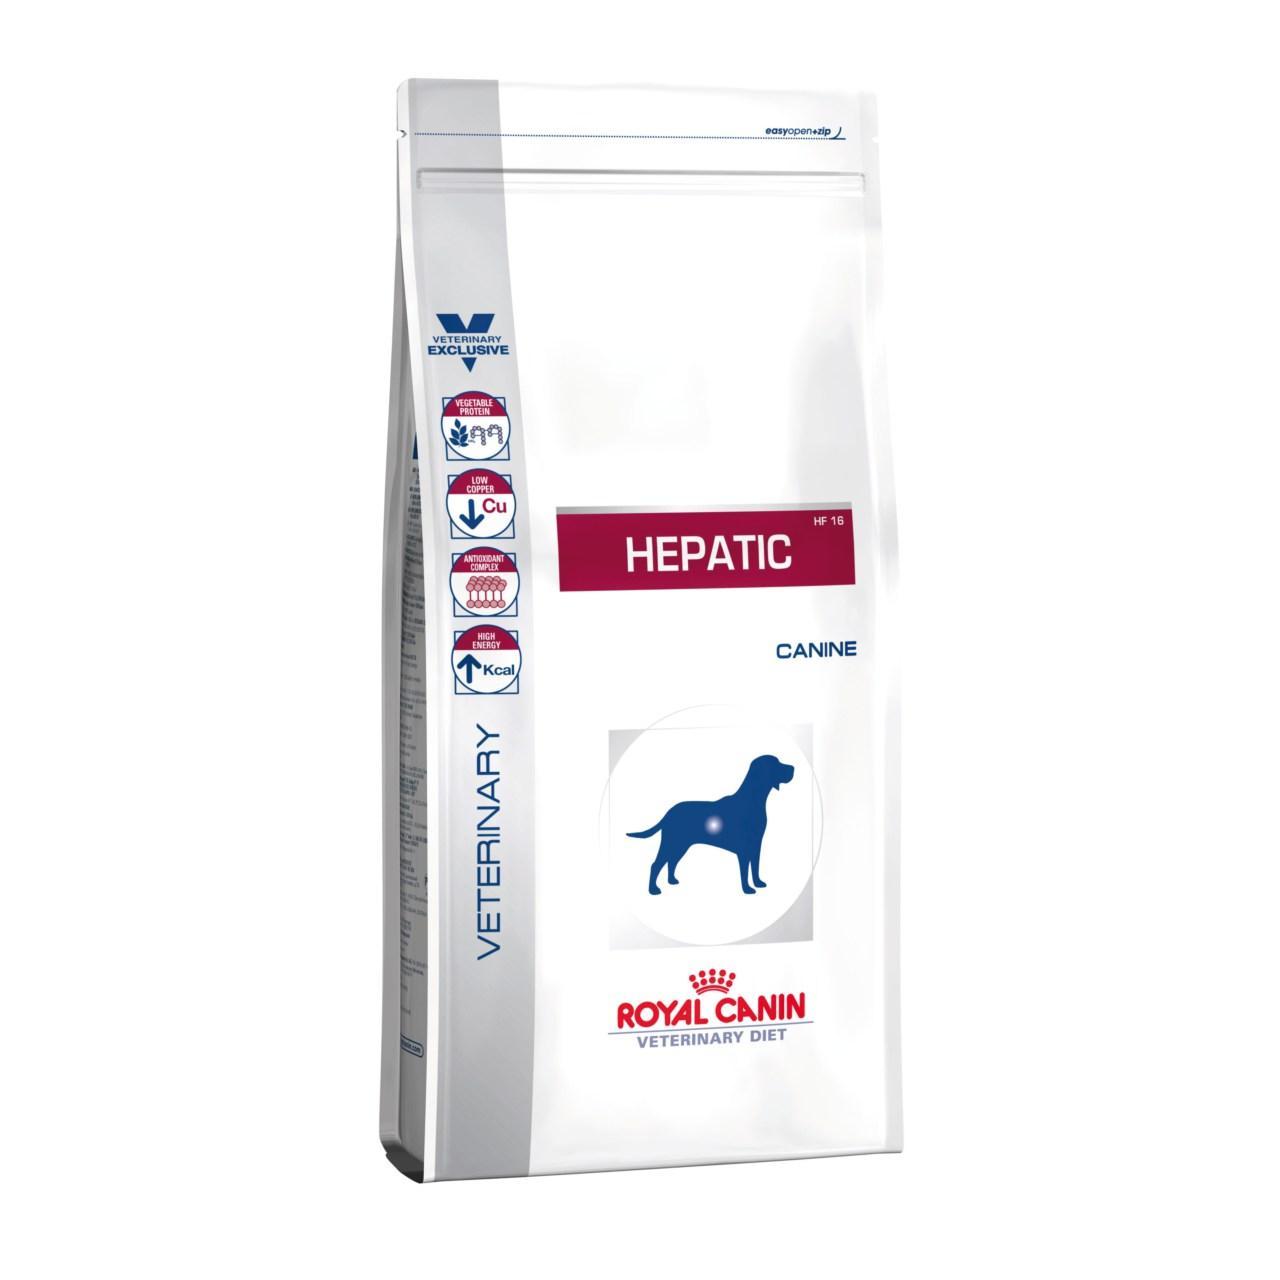 An image of Royal Canin Canine Hepatic